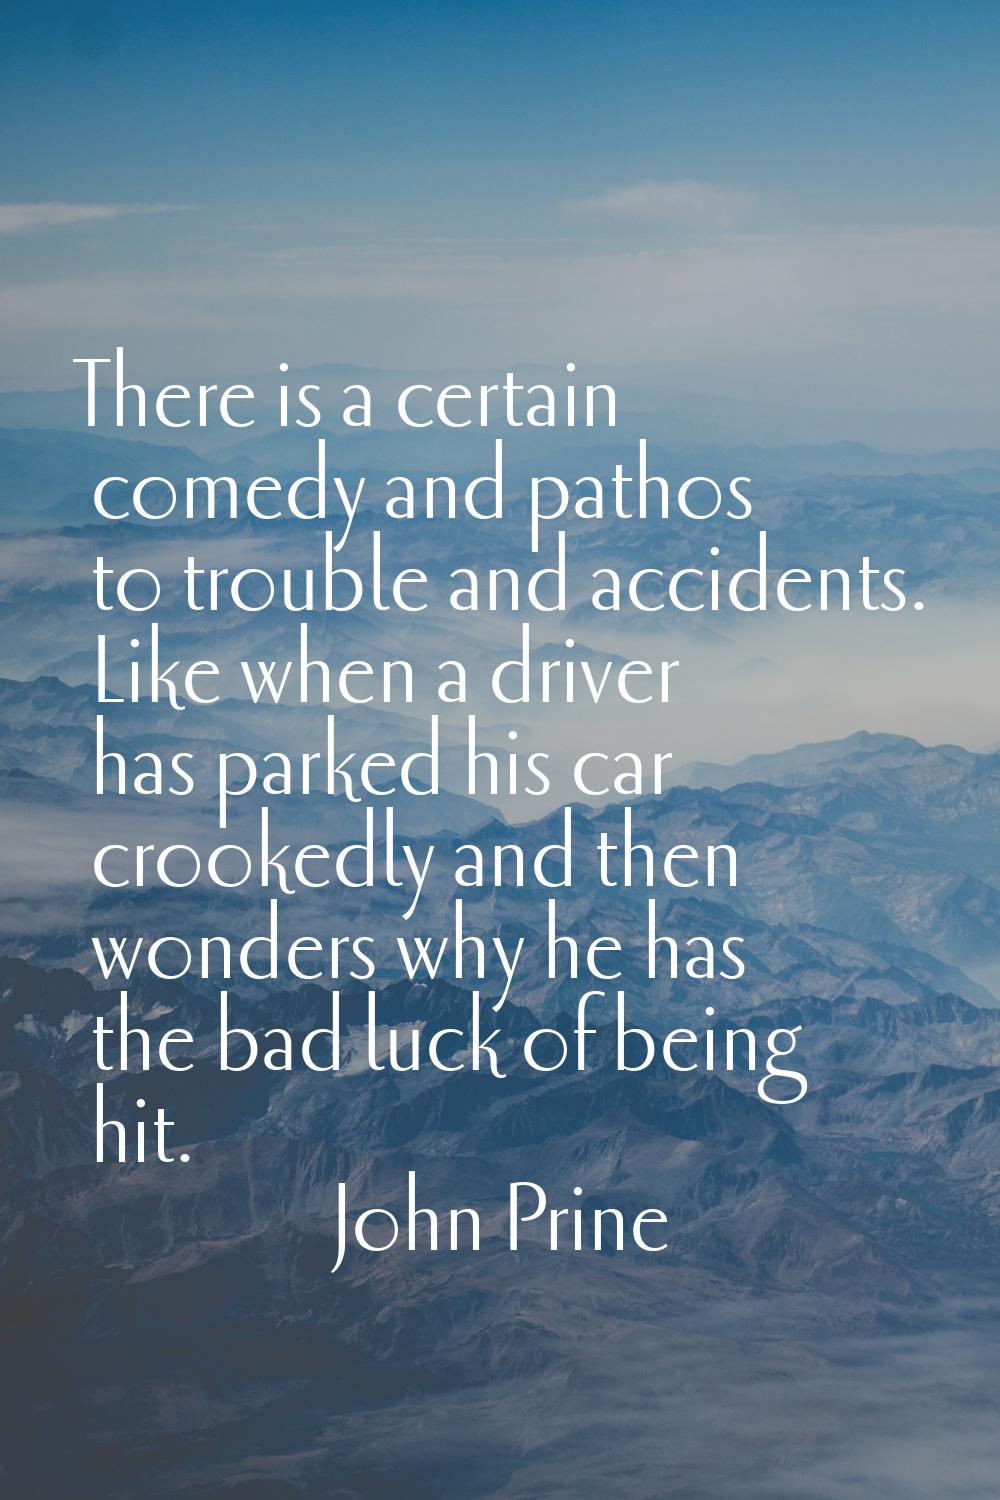 There is a certain comedy and pathos to trouble and accidents. Like when a driver has parked his ca